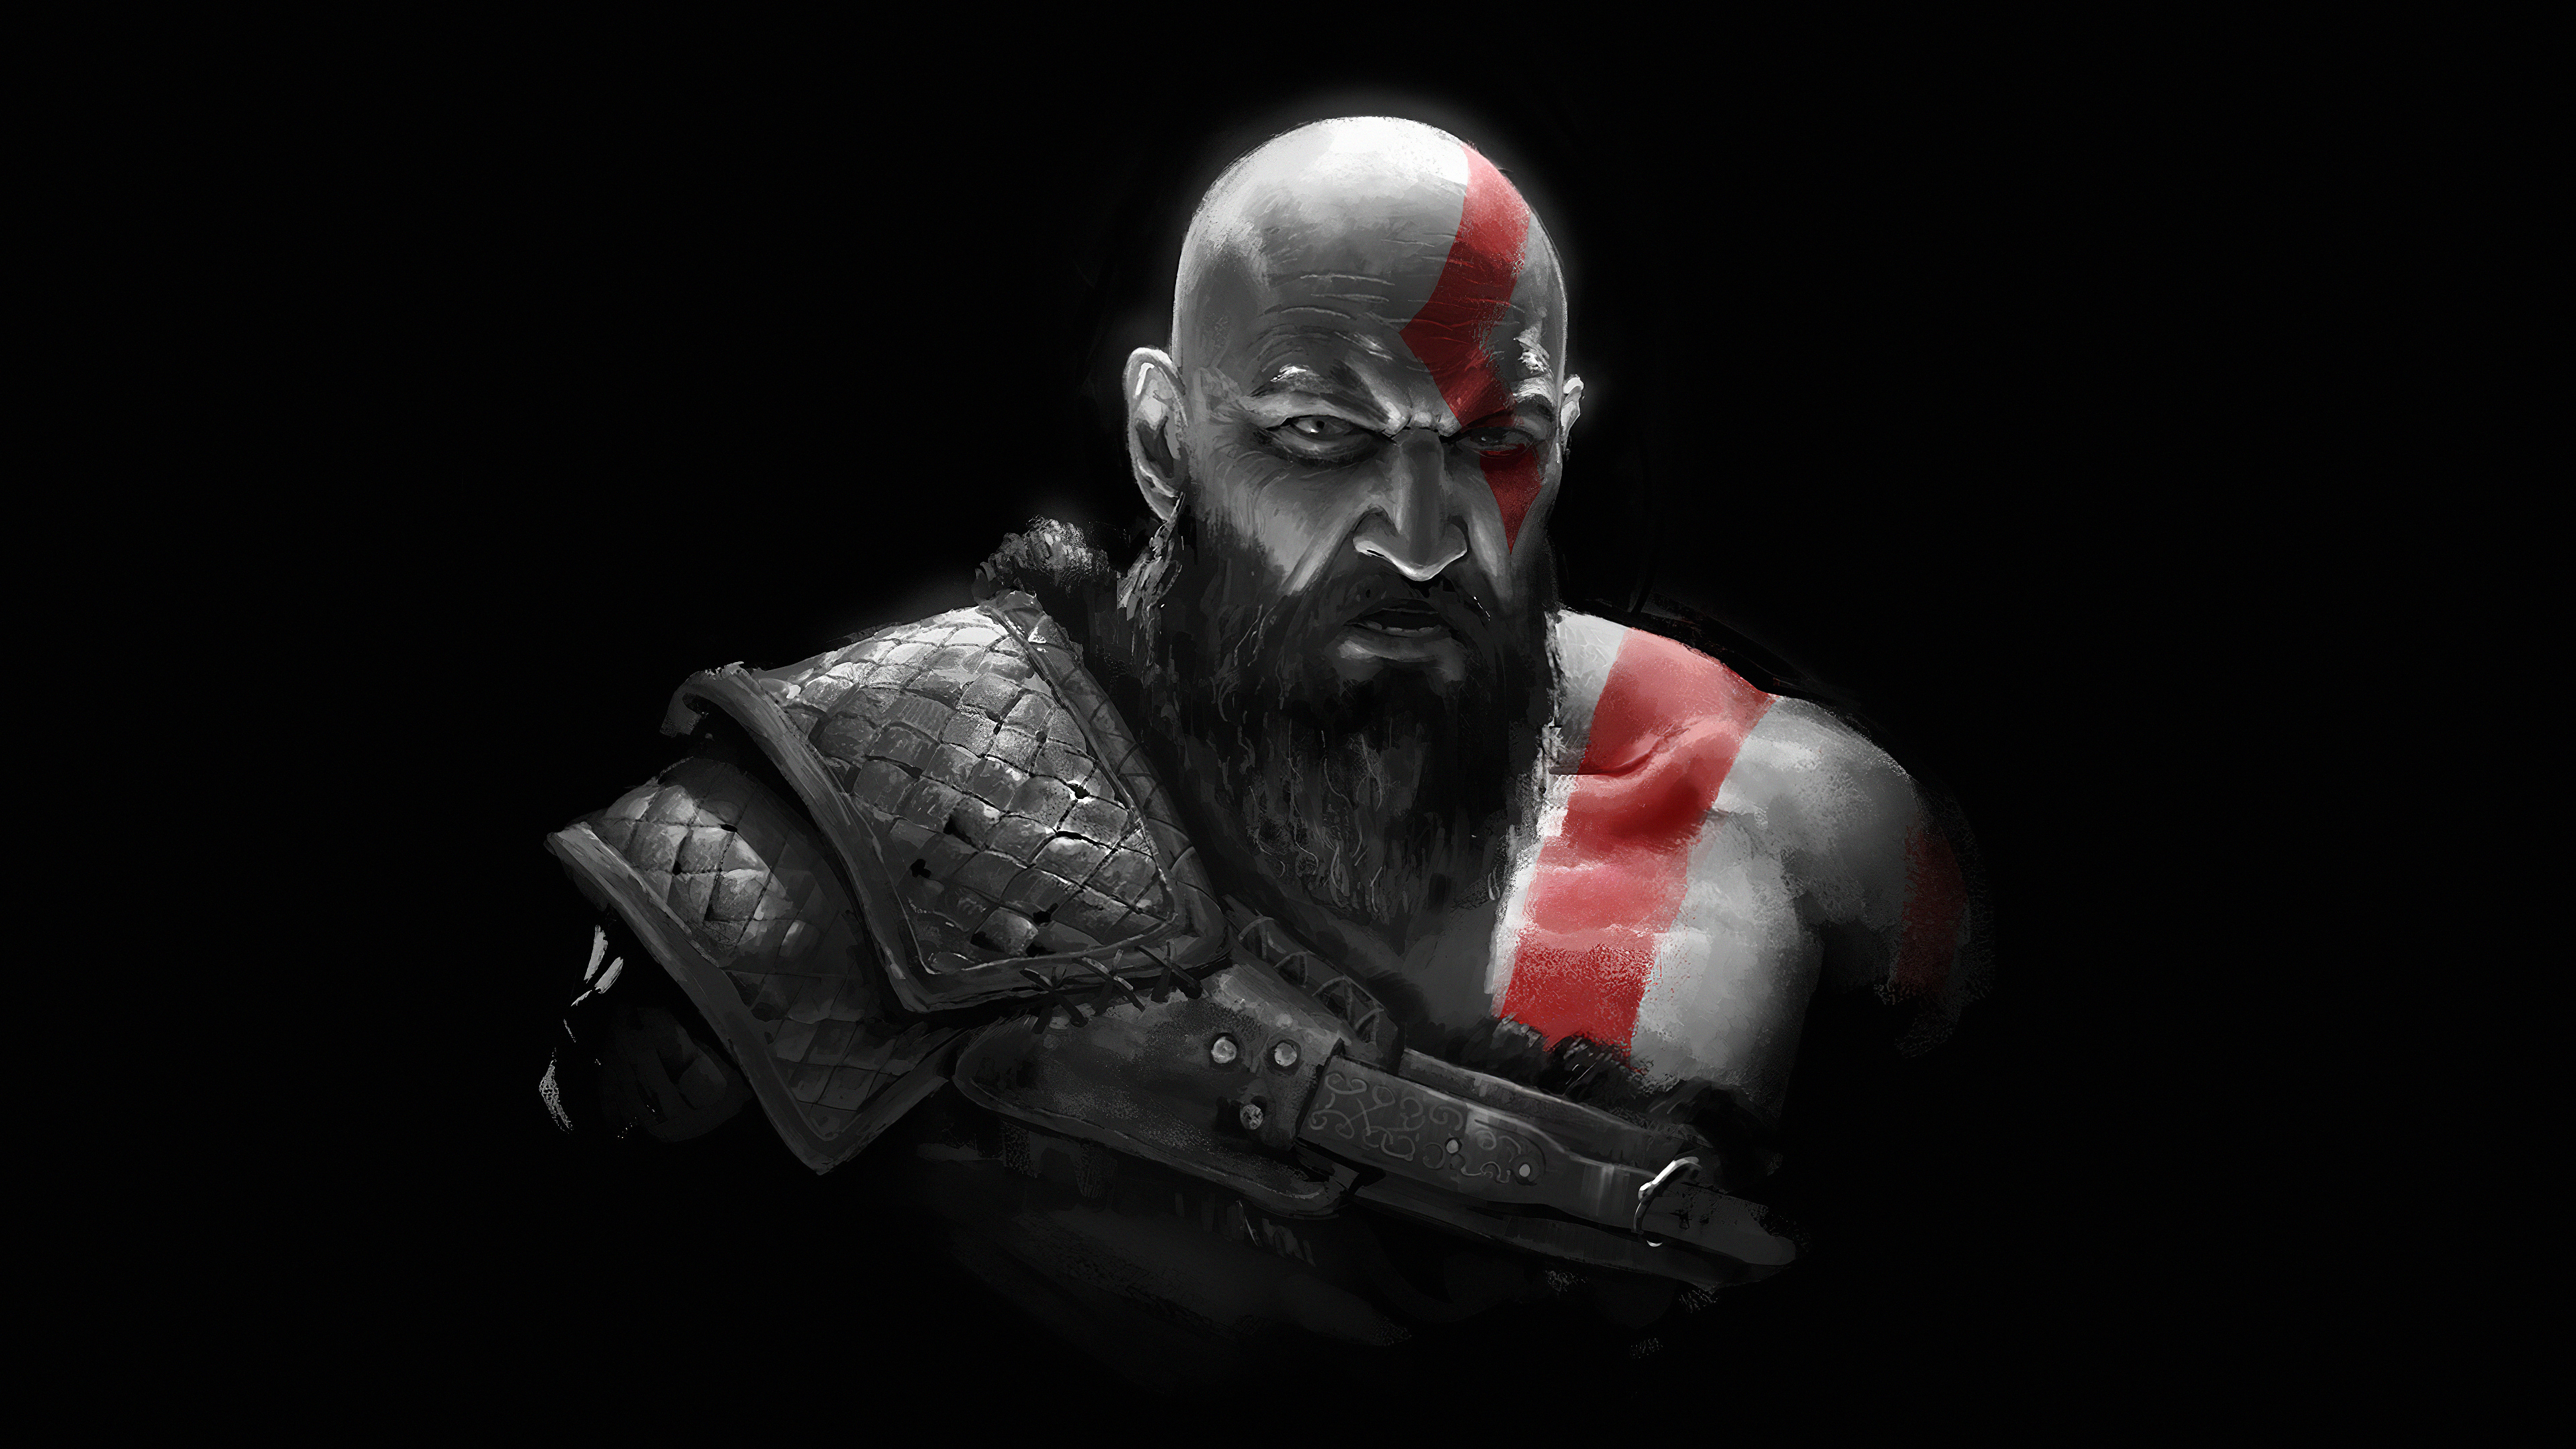 3840x2160 Kratos Gow Amoled 4k Wallpaper Hd Games 4k Wallpapers Images Photos And Background